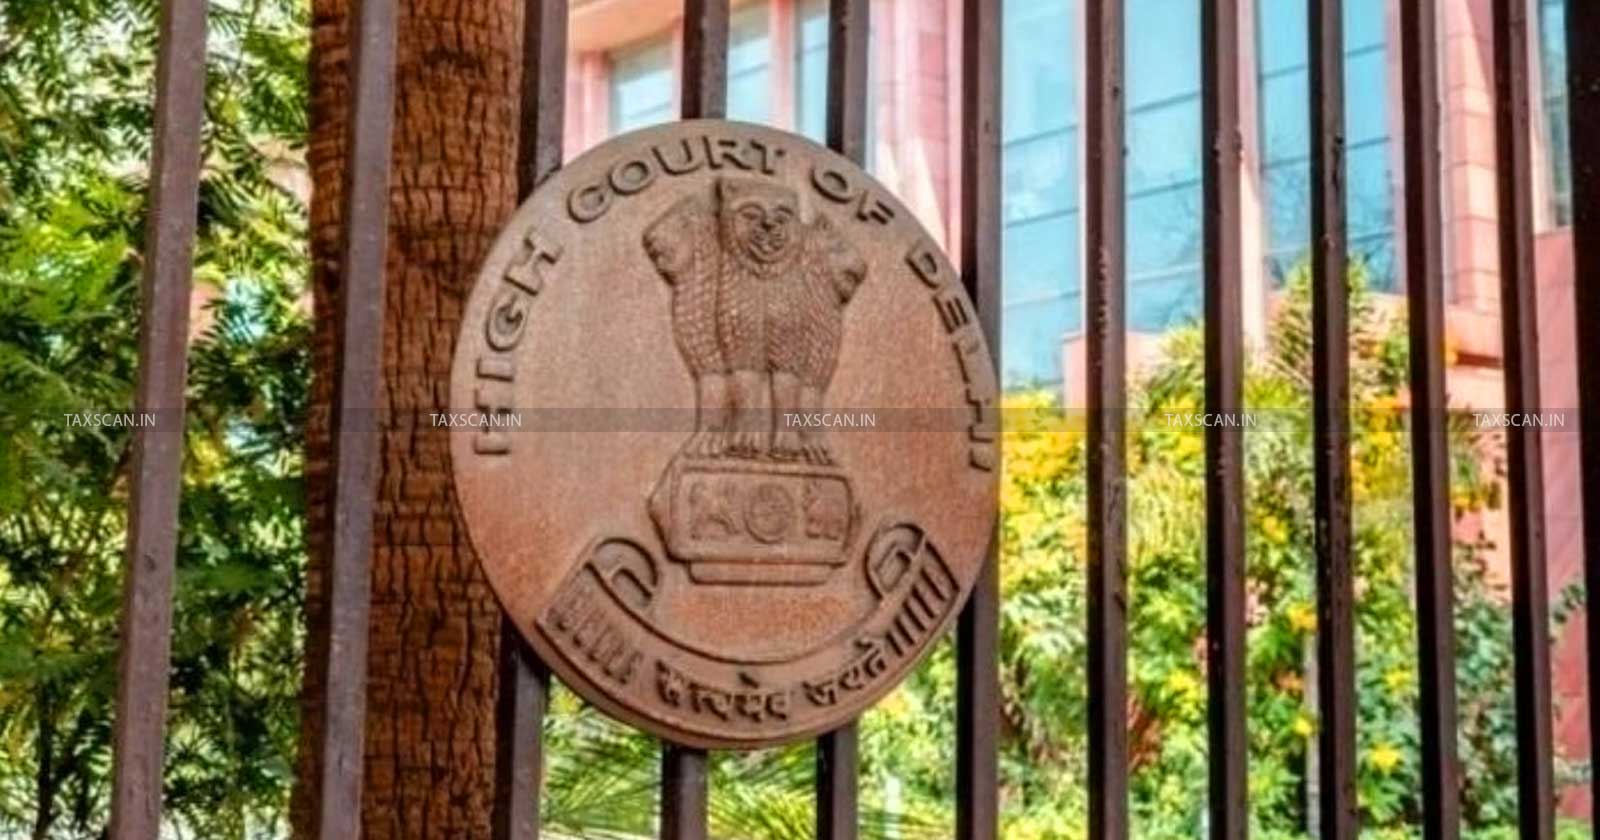 GST - Delhi High Court - Taxpayers Detailed Reply - Readjudication - TAXSCAN